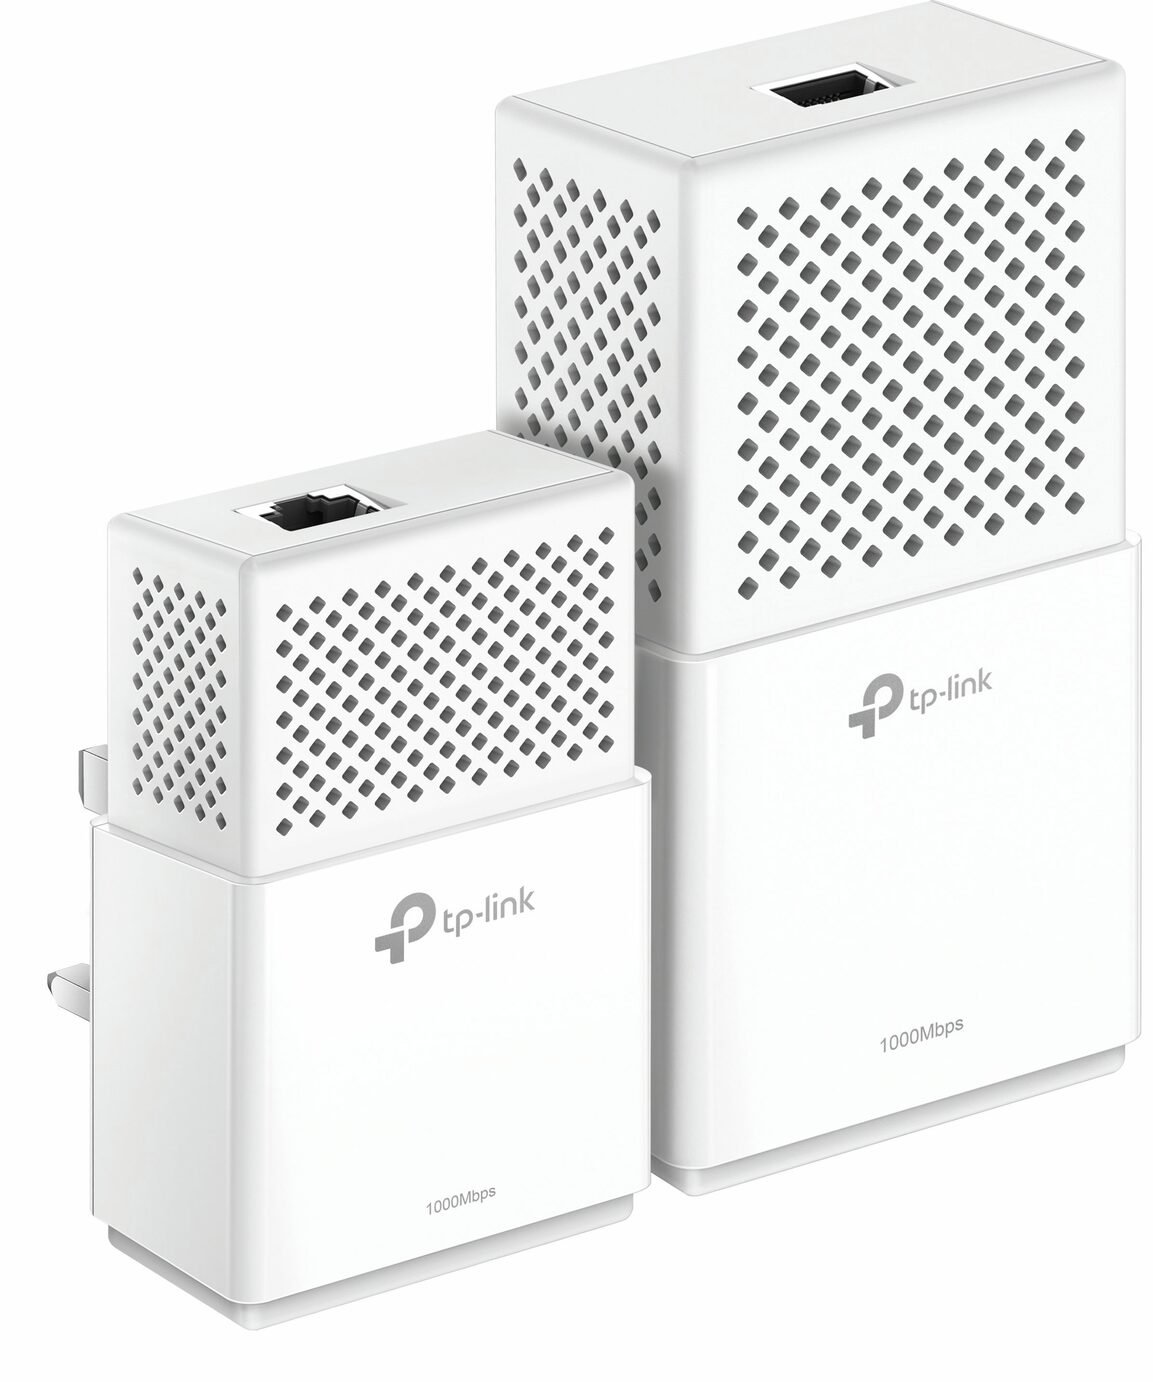 TP-Link AC750 Wi-Fi Extender Booster & 1GB Powerline Kit Review